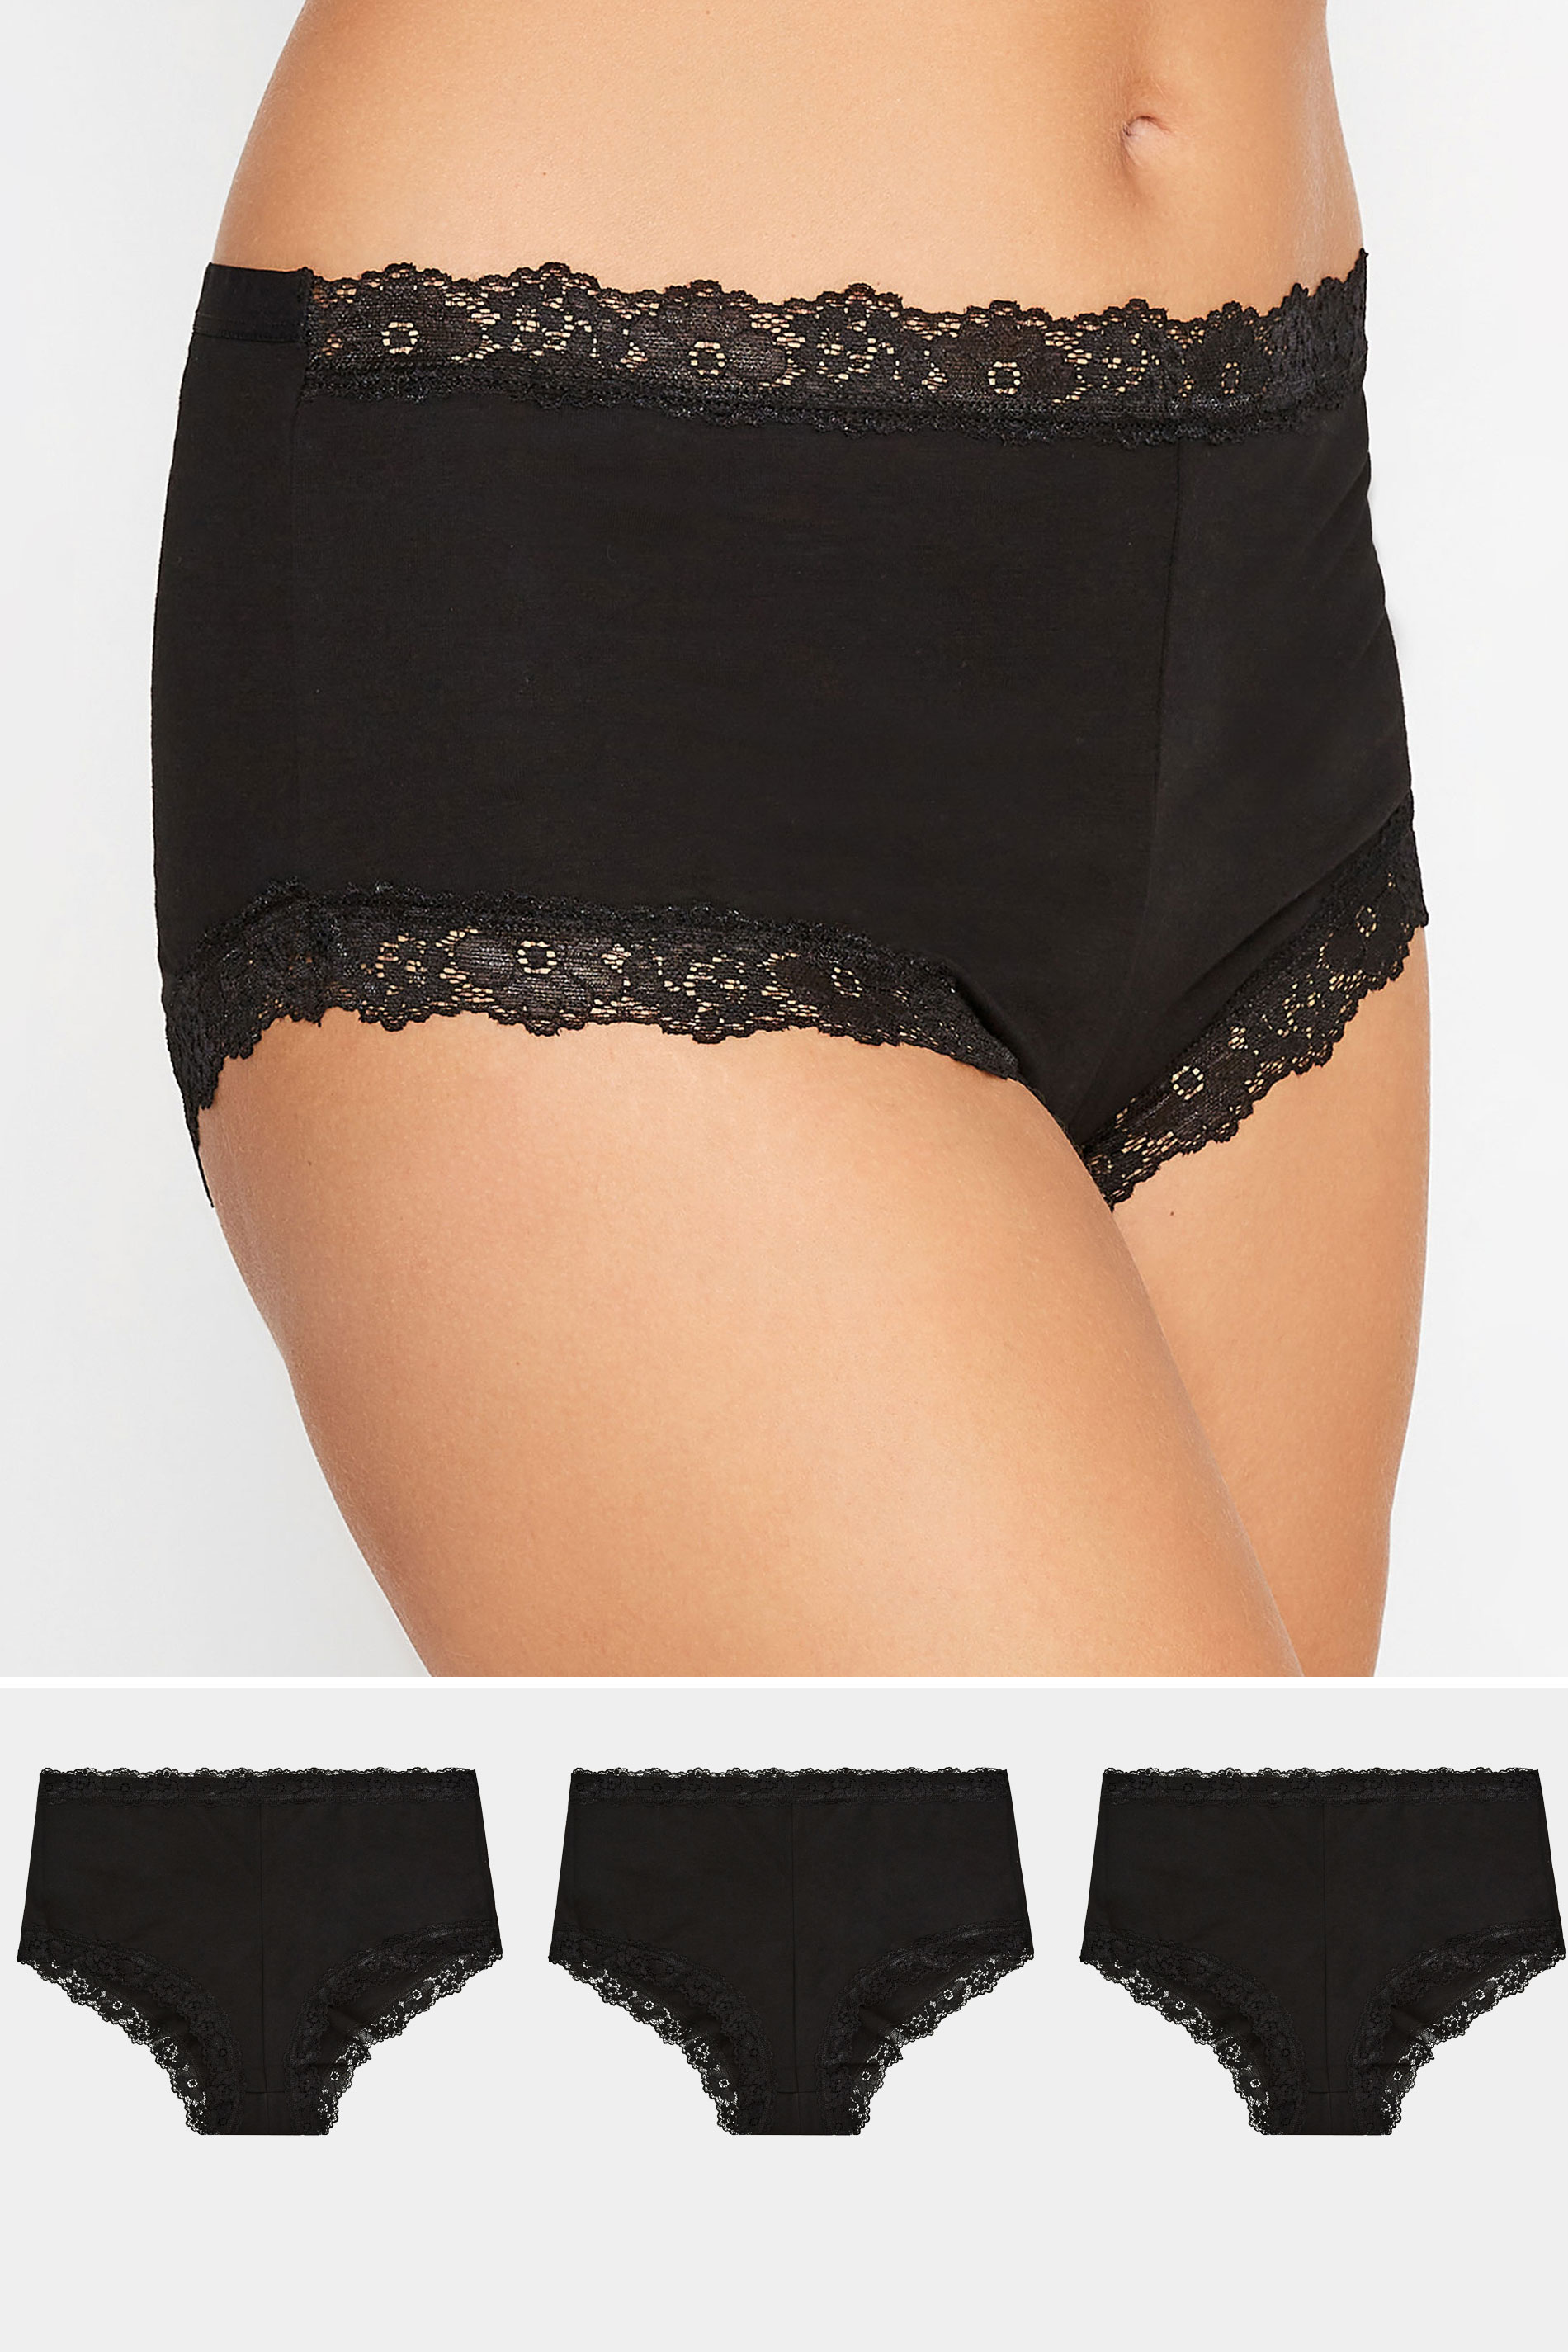 LTS Tall 3 PACK Black Scalloped Lace Trim Brief Pants | Long Tall Sally 1